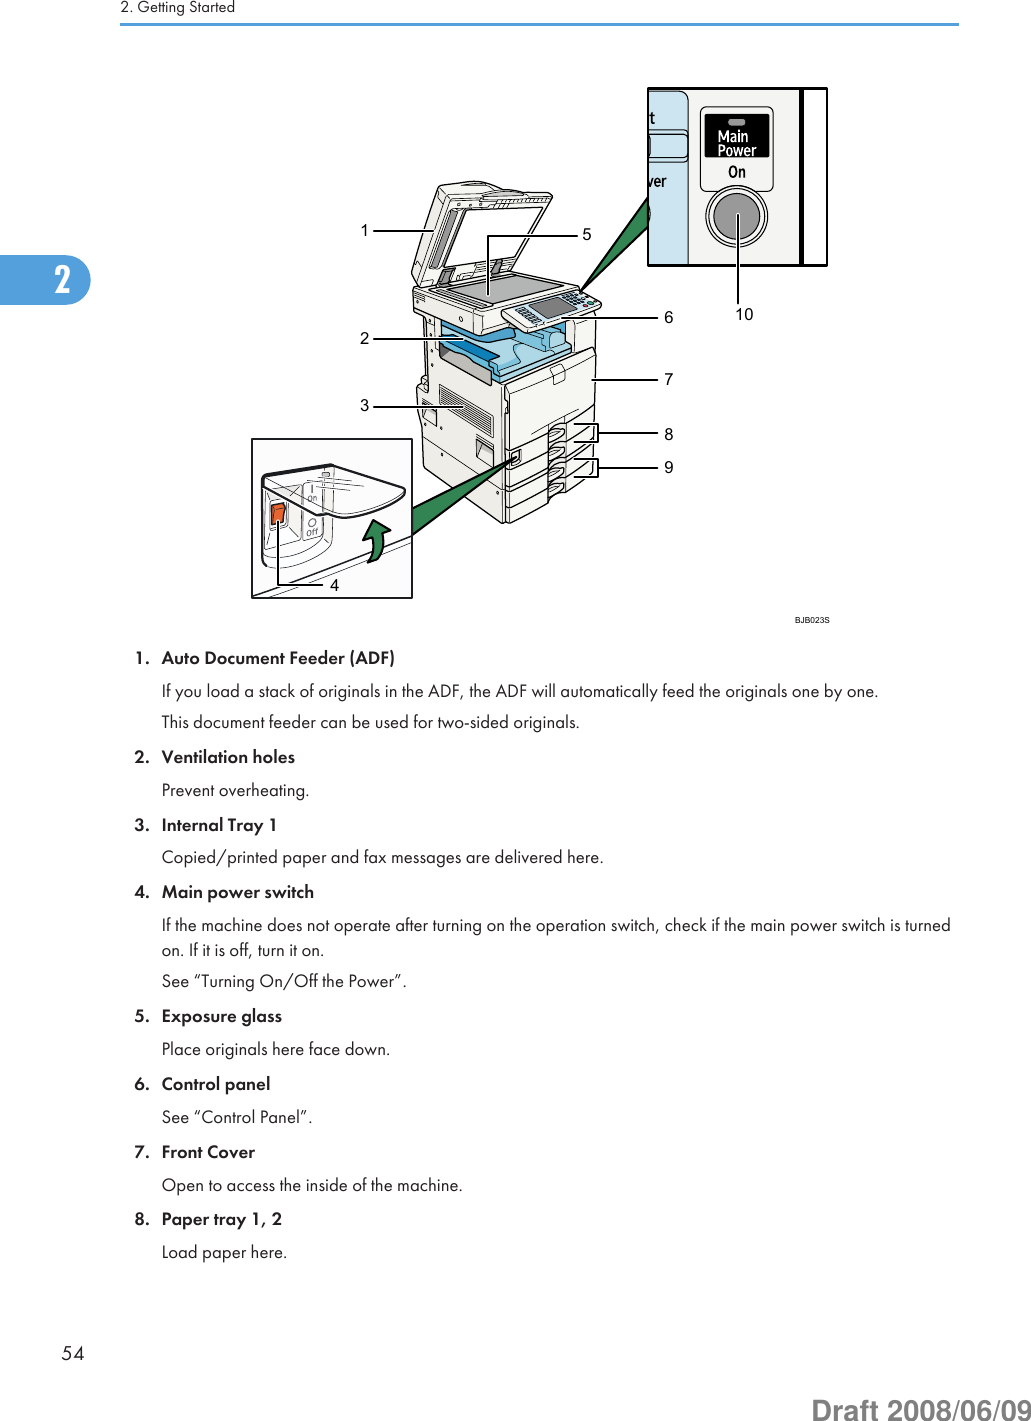 BJB023S412356789101. Auto Document Feeder (ADF)If you load a stack of originals in the ADF, the ADF will automatically feed the originals one by one.This document feeder can be used for two-sided originals.2. Ventilation holesPrevent overheating.3. Internal Tray 1Copied/printed paper and fax messages are delivered here.4. Main power switchIf the machine does not operate after turning on the operation switch, check if the main power switch is turnedon. If it is off, turn it on.See “Turning On/Off the Power”.5. Exposure glassPlace originals here face down.6. Control panelSee “Control Panel”.7. Front CoverOpen to access the inside of the machine.8. Paper tray 1, 2Load paper here.2. Getting Started542Draft 2008/06/09